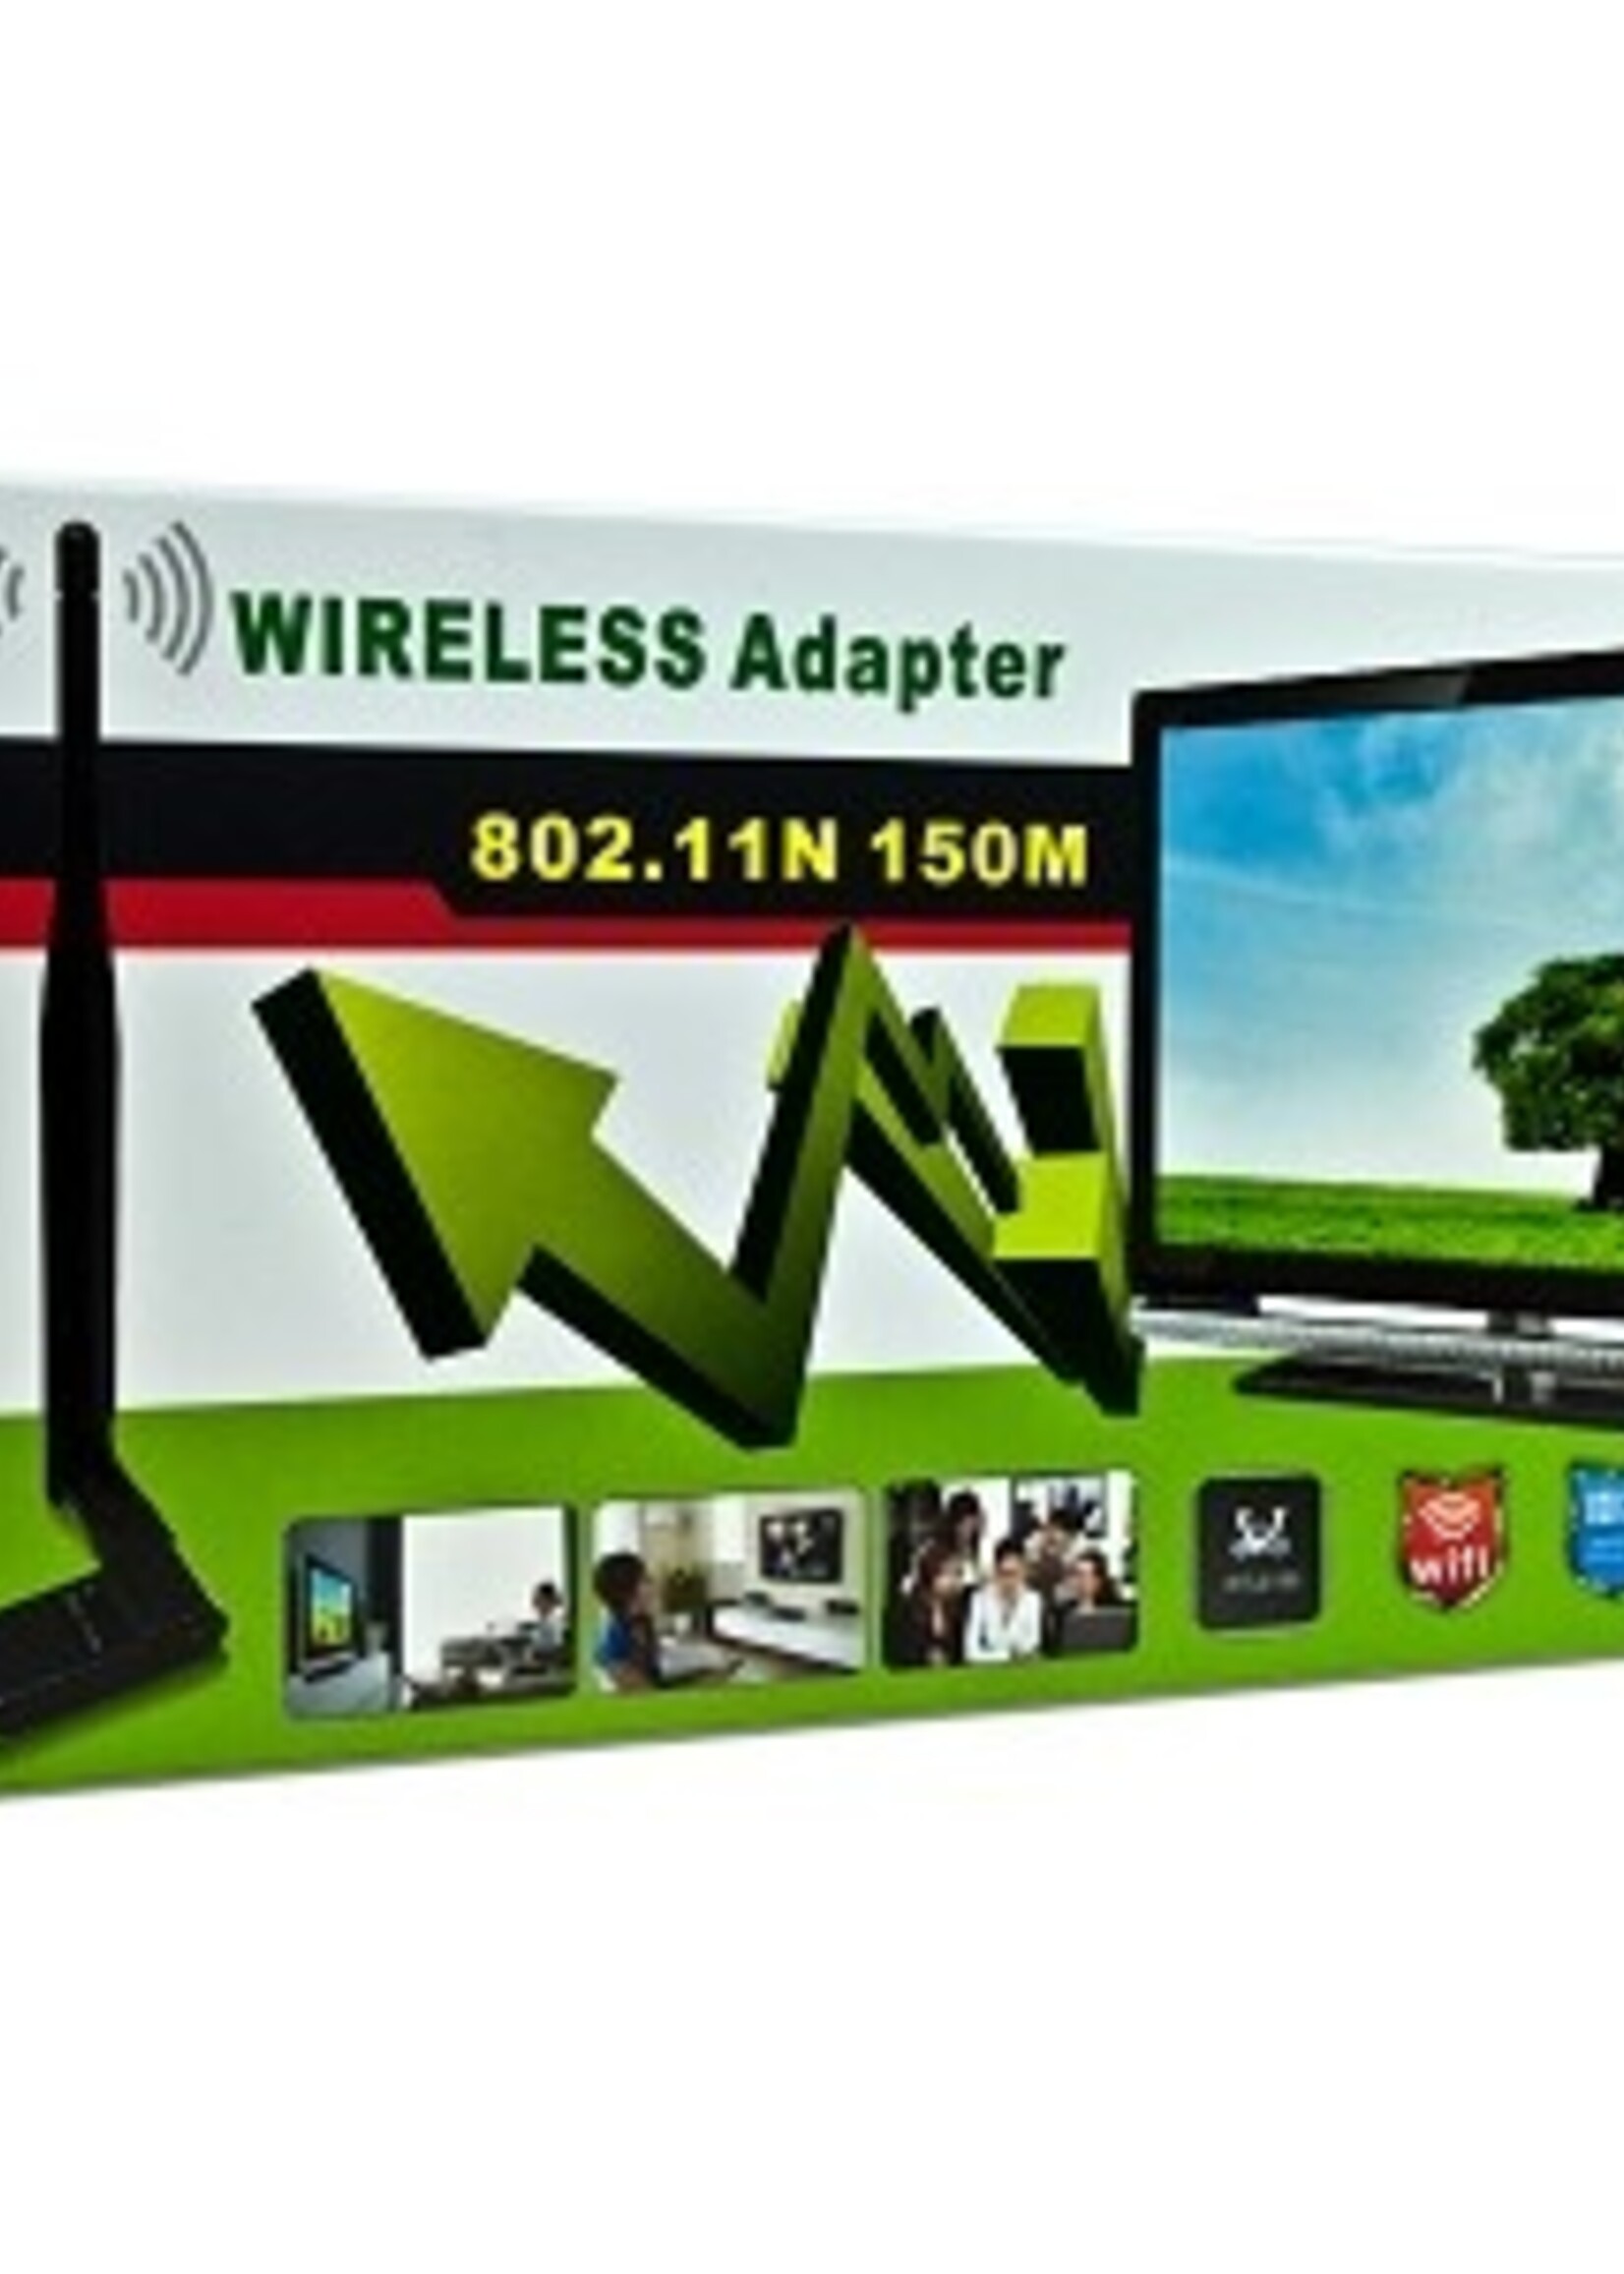 802.11N 150Mbps Wireless Adapter